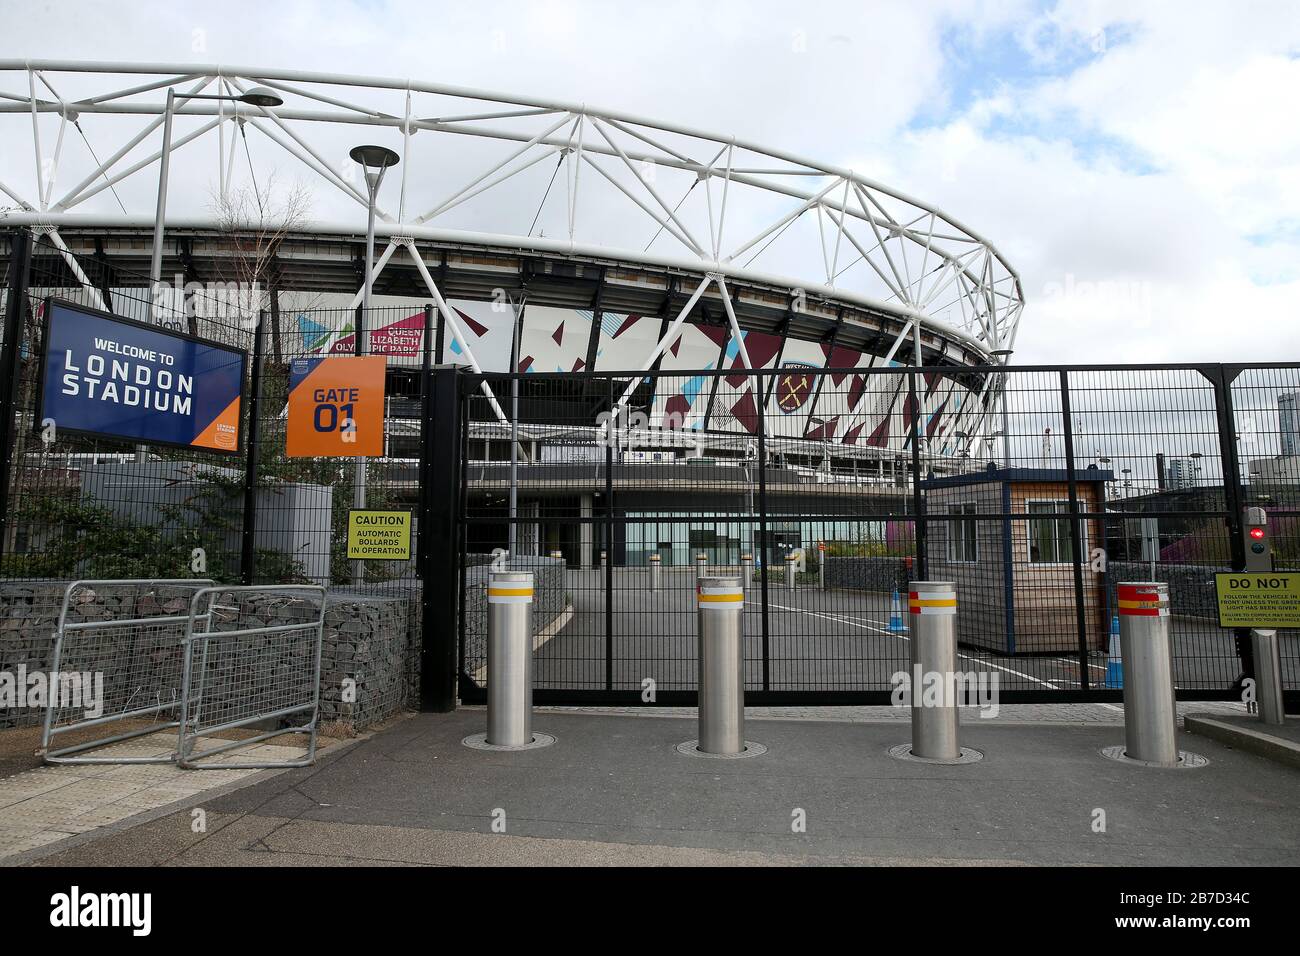 A view of locked gates outside the London Stadium, home of West Ham United Football Club, following Friday's announcement that the Premier League has suspended all matches until Saturday April 4, 2020. Stock Photo